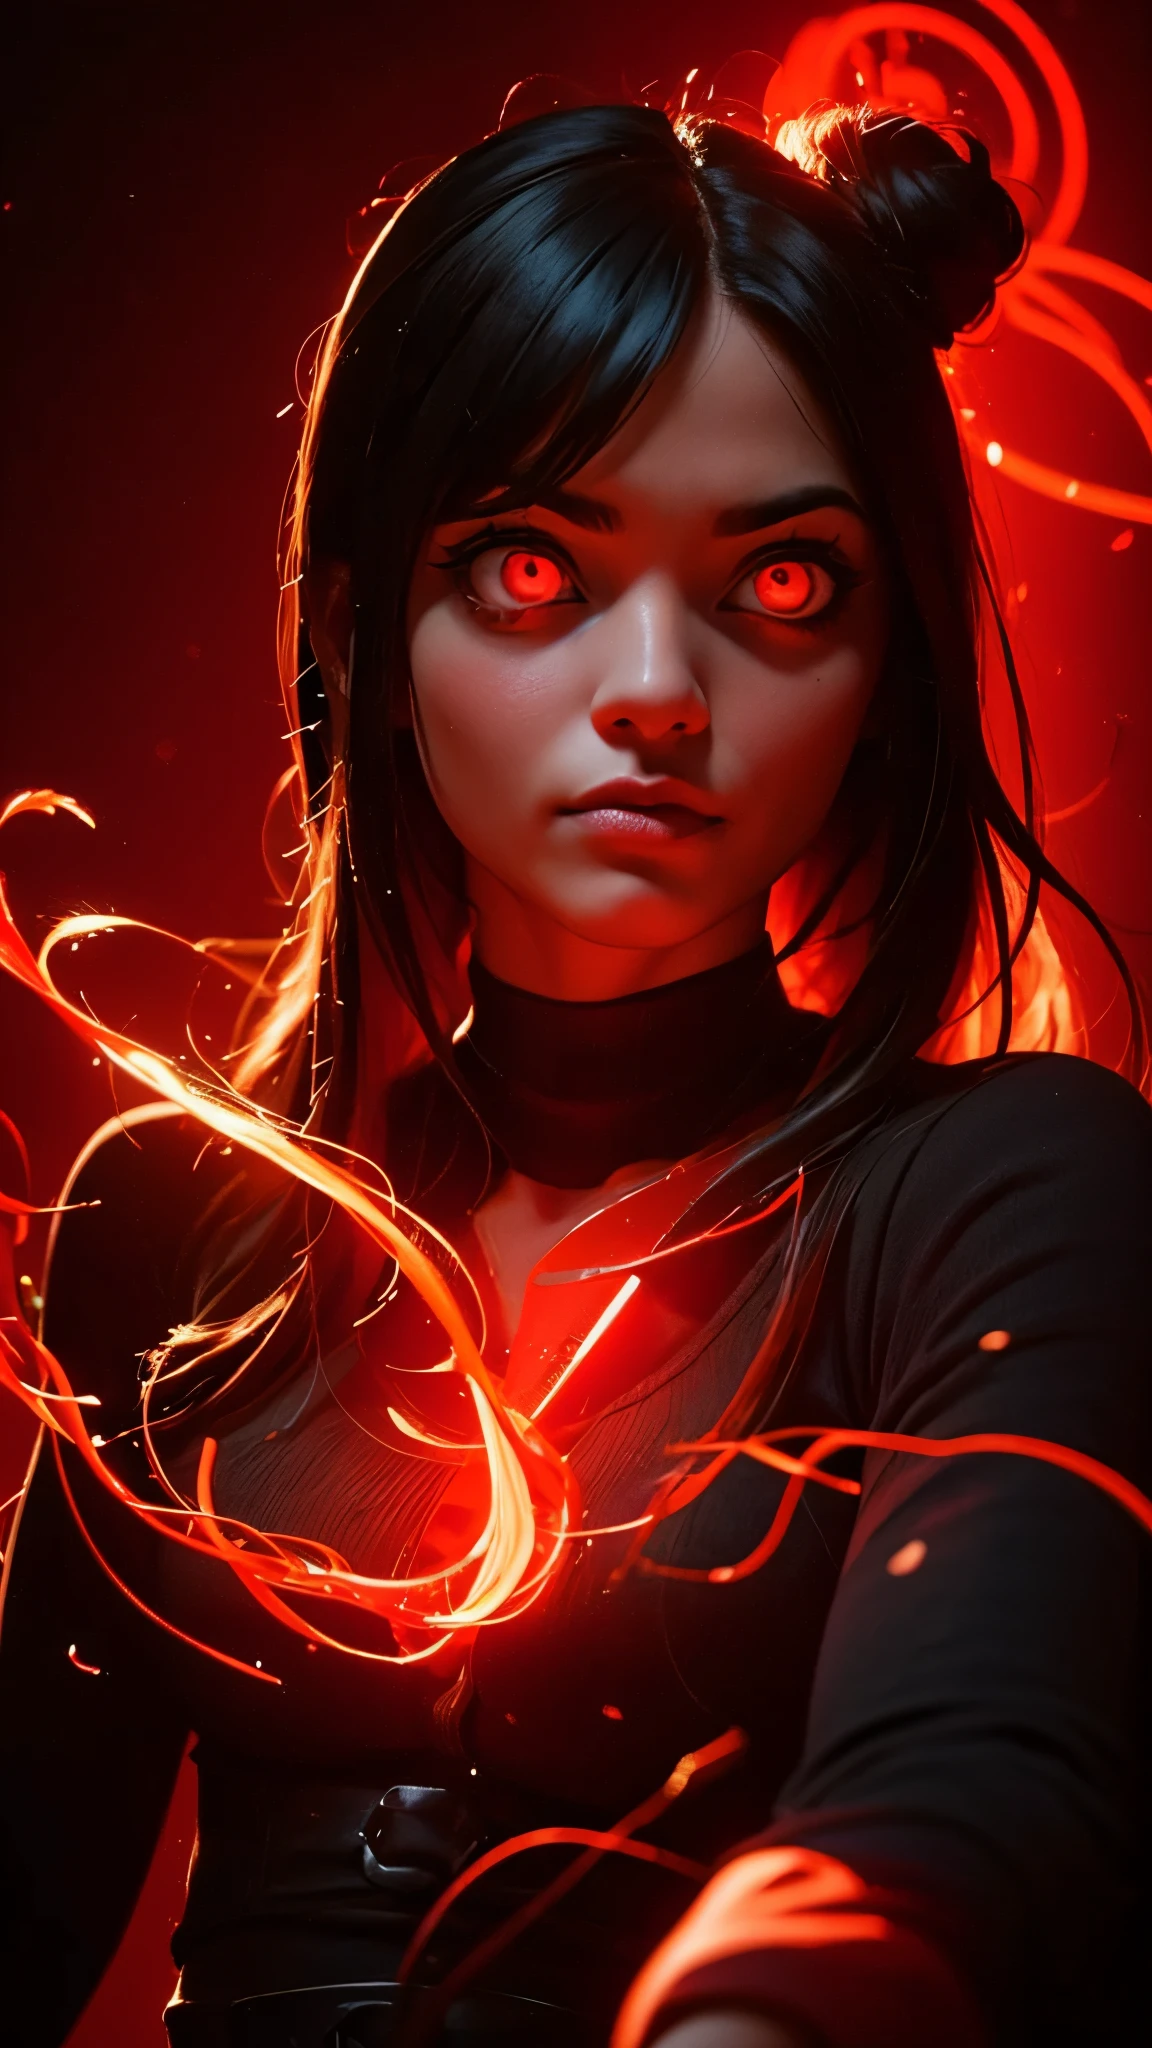 a woman in a black dress, glowing red, red and cinematic lighting, red glowing skin, red glow, cinematic red lighting, darkness aura red light, 3 d neon art of a womens body, red neon, with red glowing eyes, red on black, detailed red lighting, with glowing red eyes, red lighting, dark glowing red aura